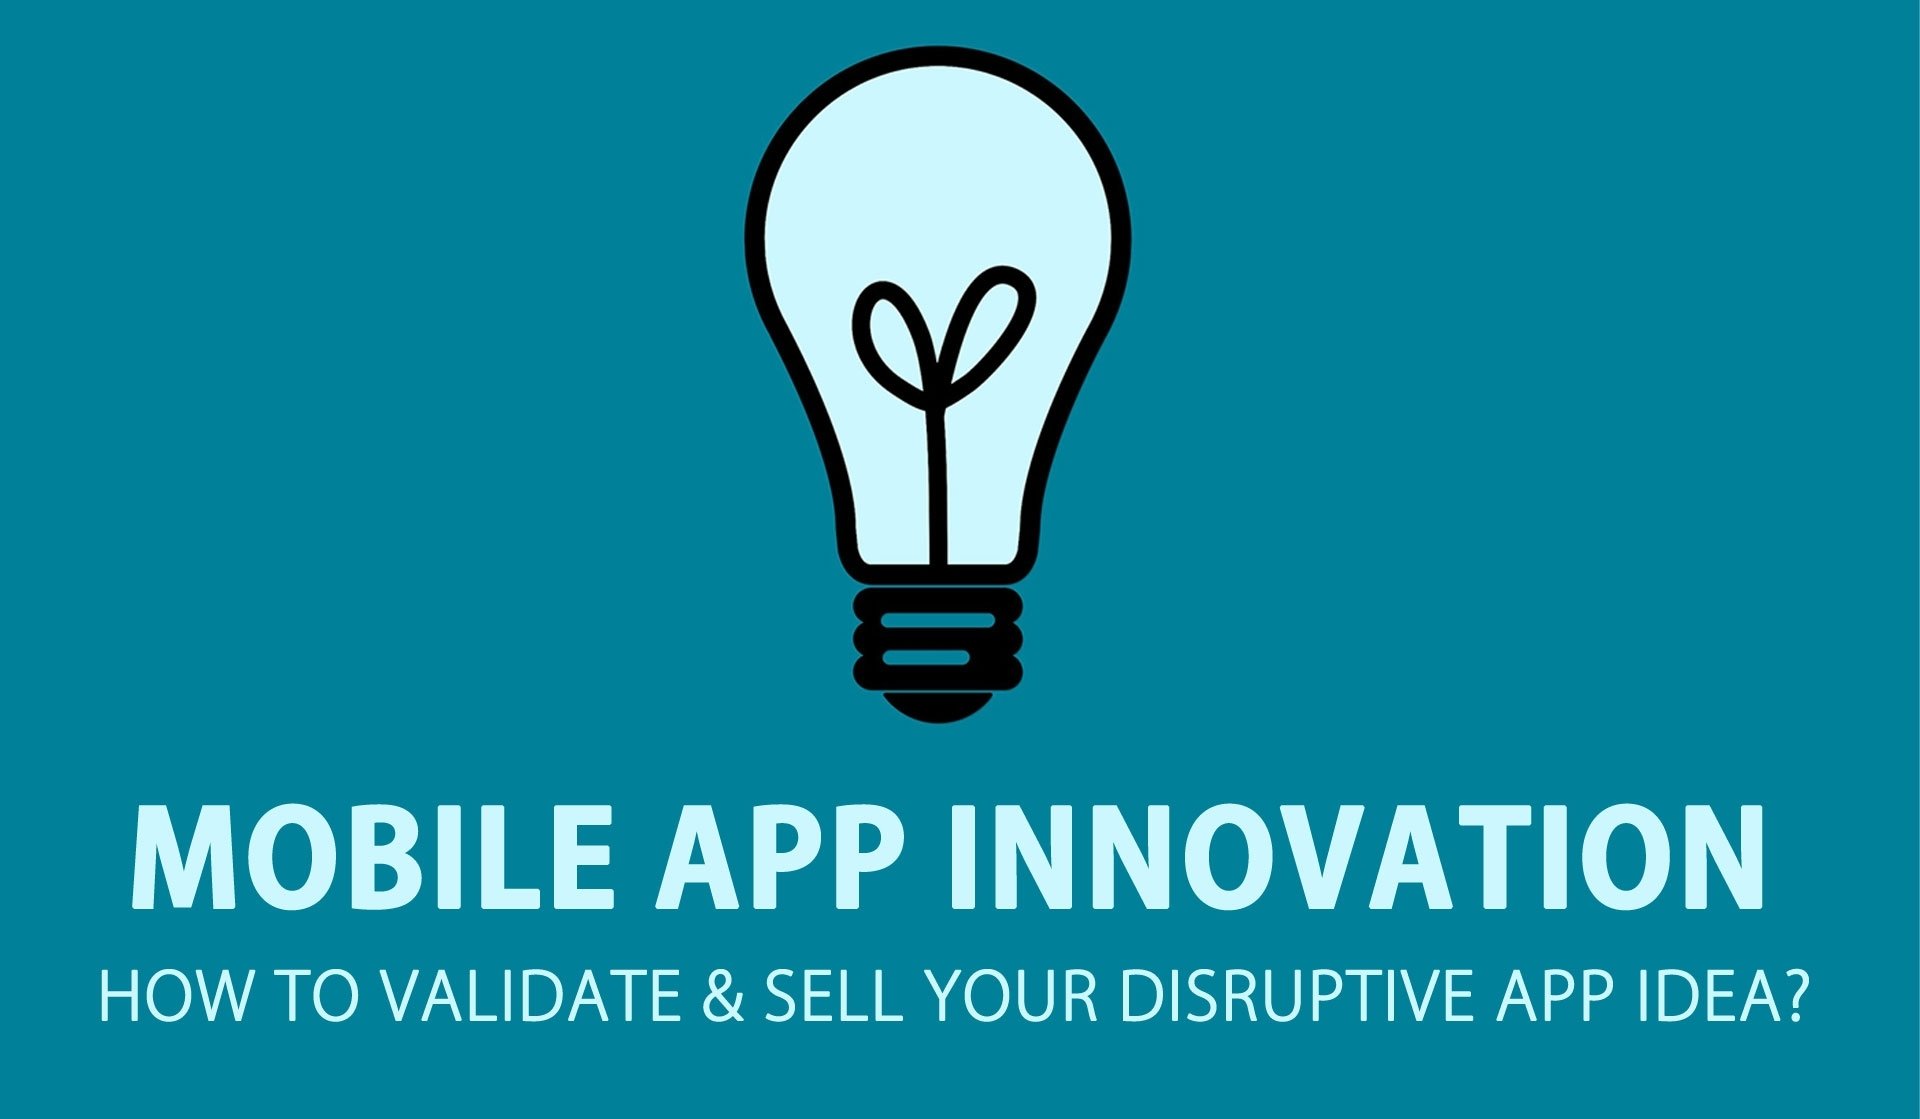 10 Pretty How To Sell App Ideas mobile app innovation how to validate and sell your disruptive app 2 2022